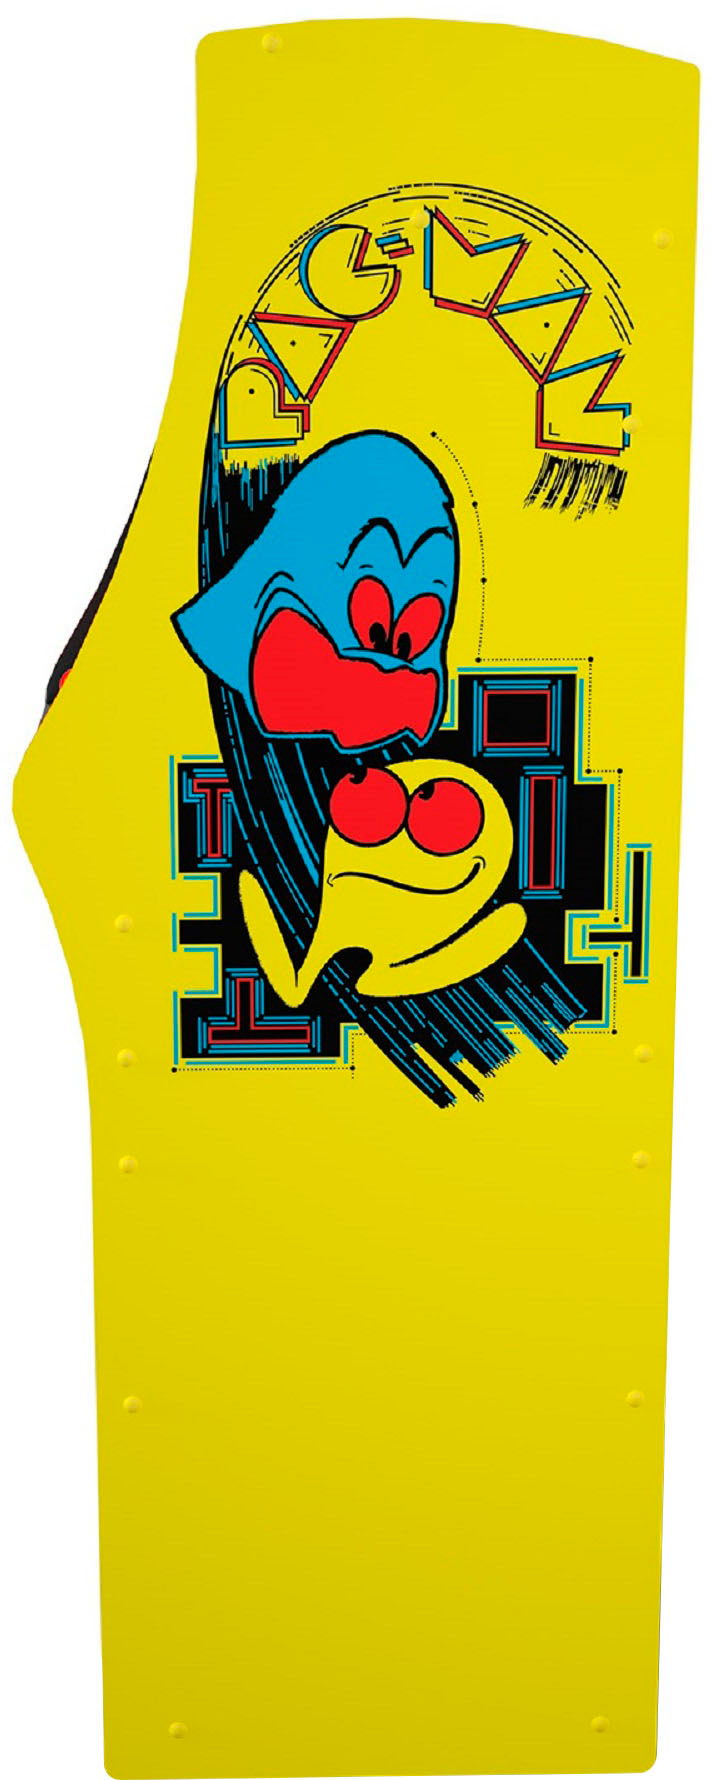 Back View: Arcade1Up - PAC-MAN Deluxe Arcade Machine - Yellow